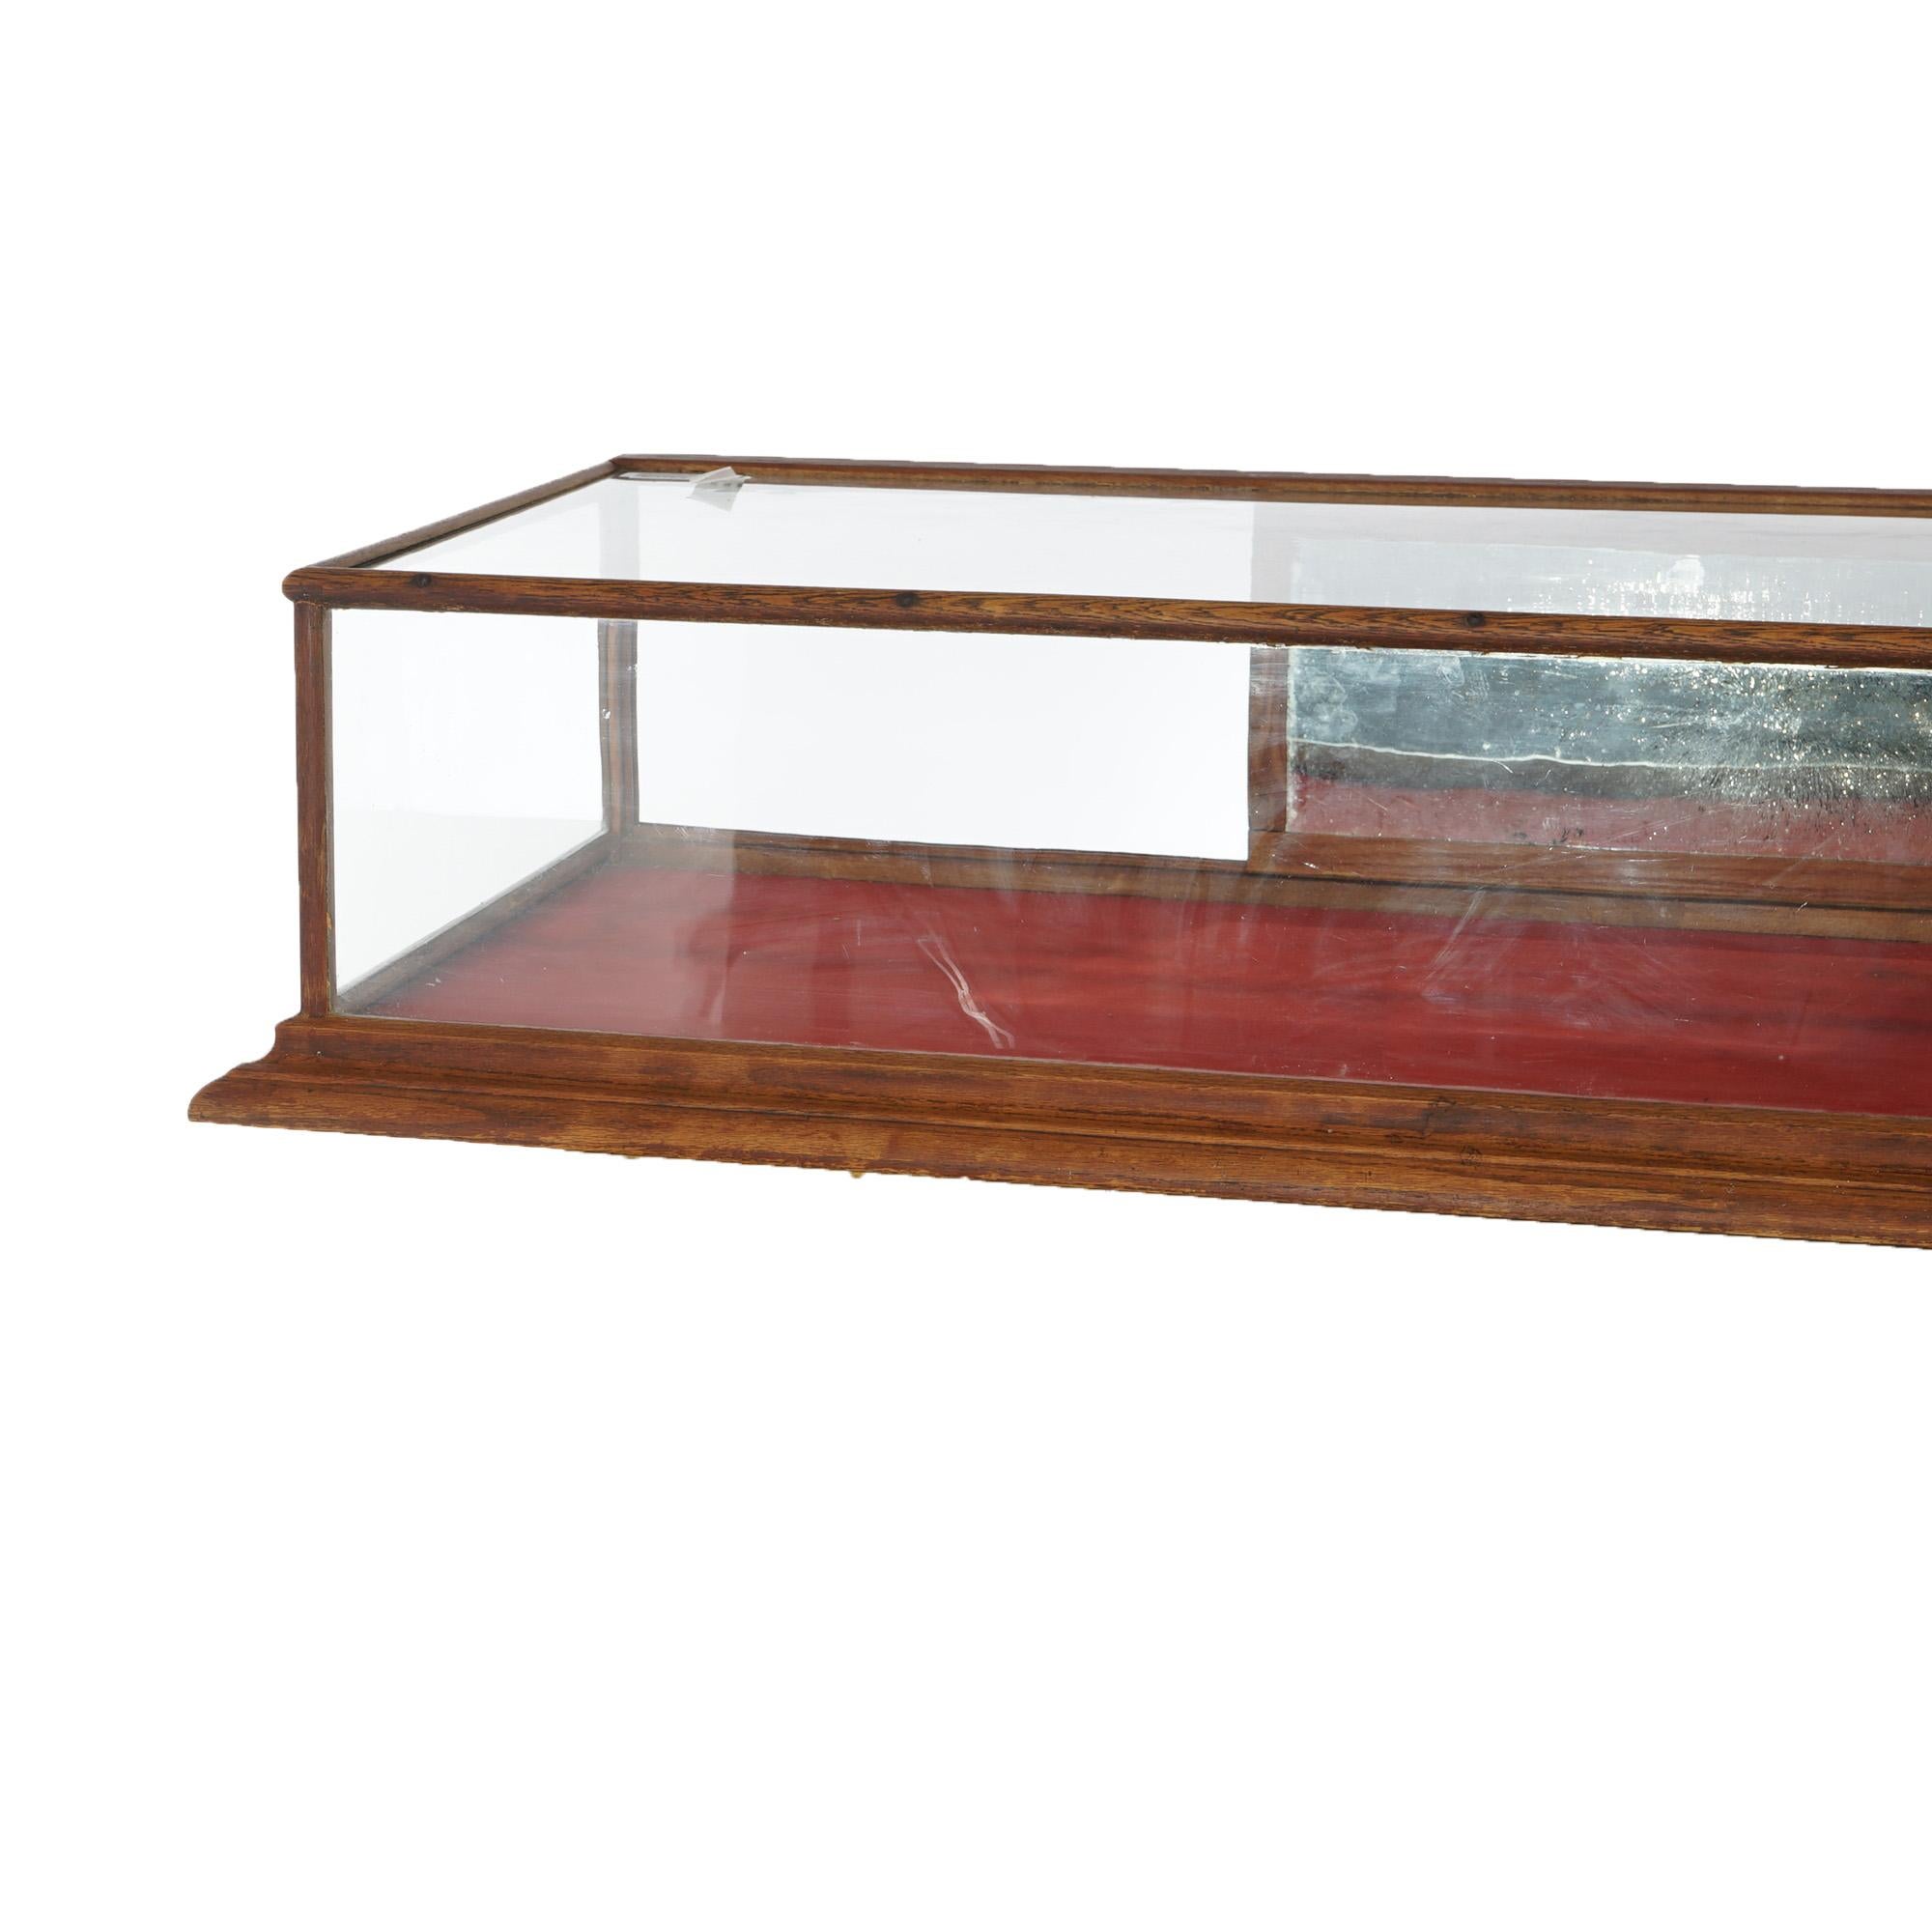 American Antique Country Store Buffalo Candy Co. 8’ Oak Table Top Display Case Circa 1900 For Sale